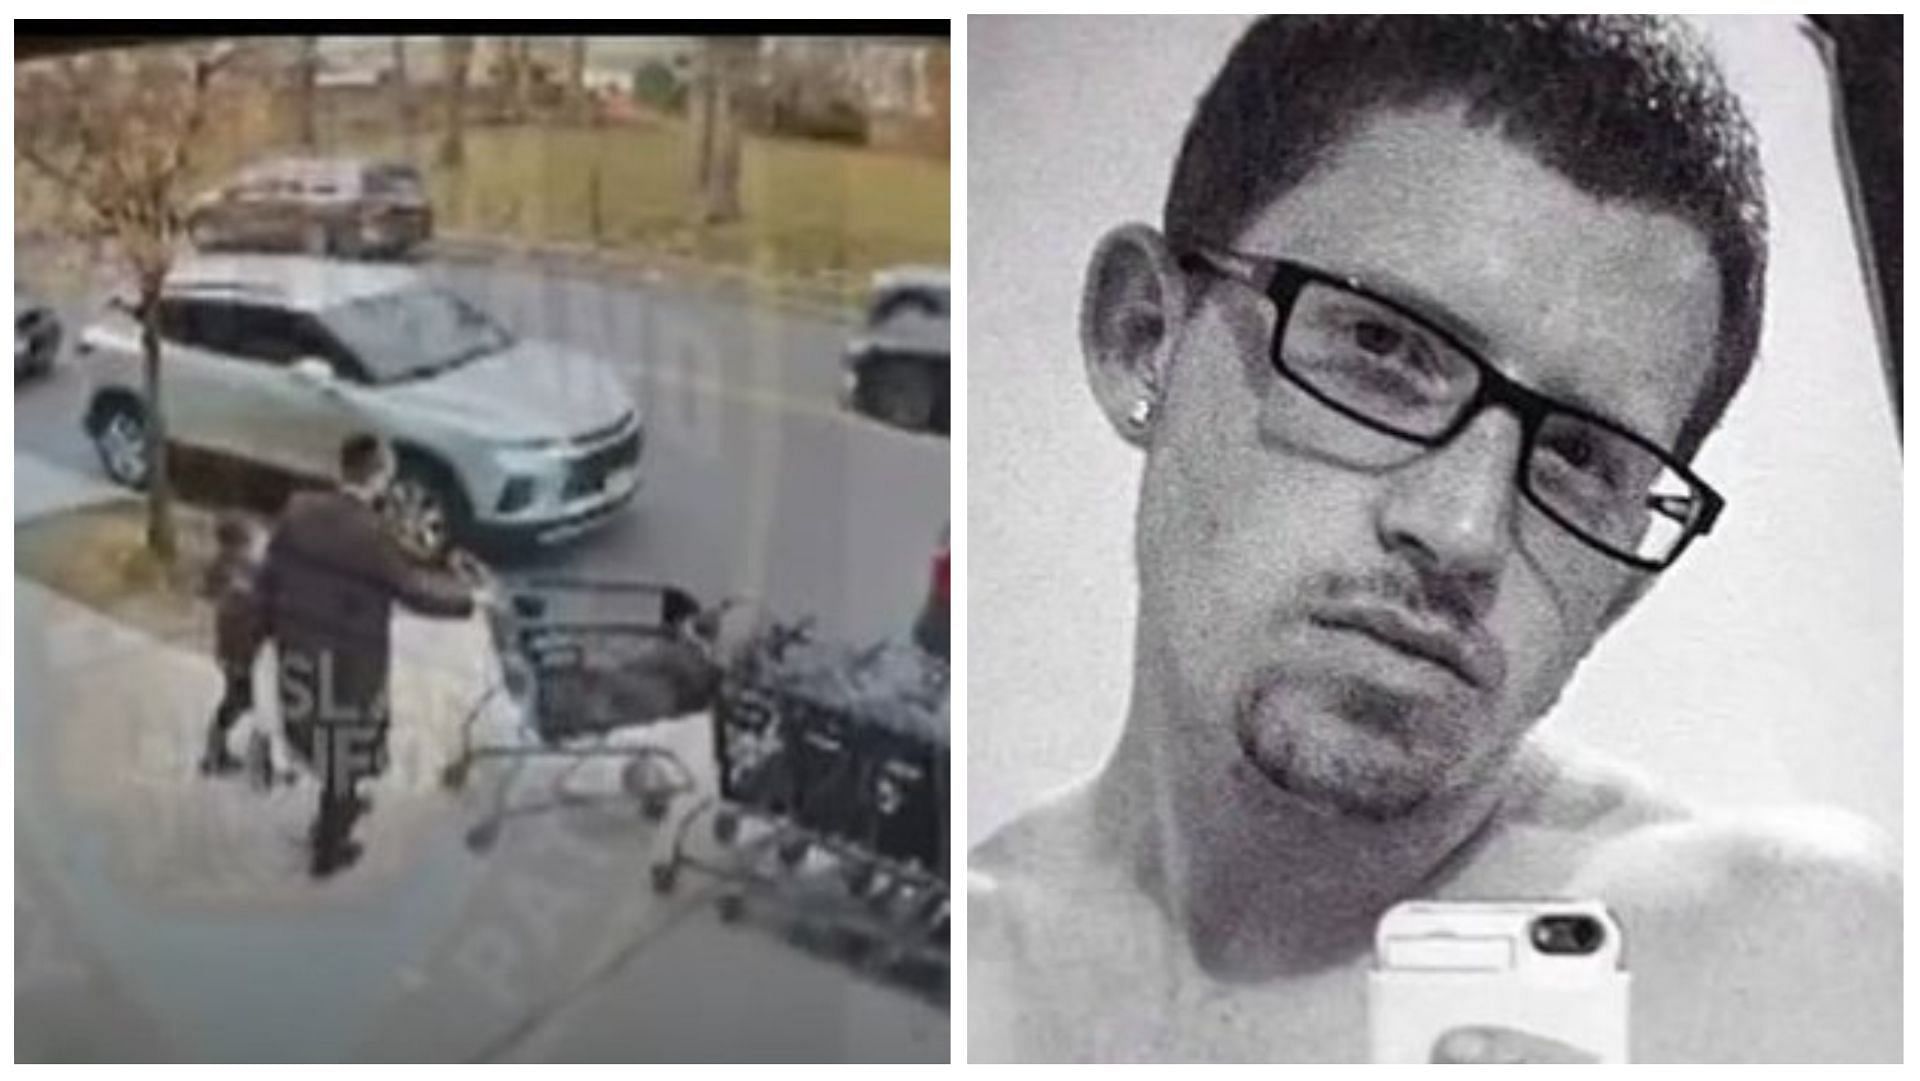 Jewish father-son duo shot in Staten Island by a Jason Kish (right), (Images by World Israel News and nycphotog/Twitter)